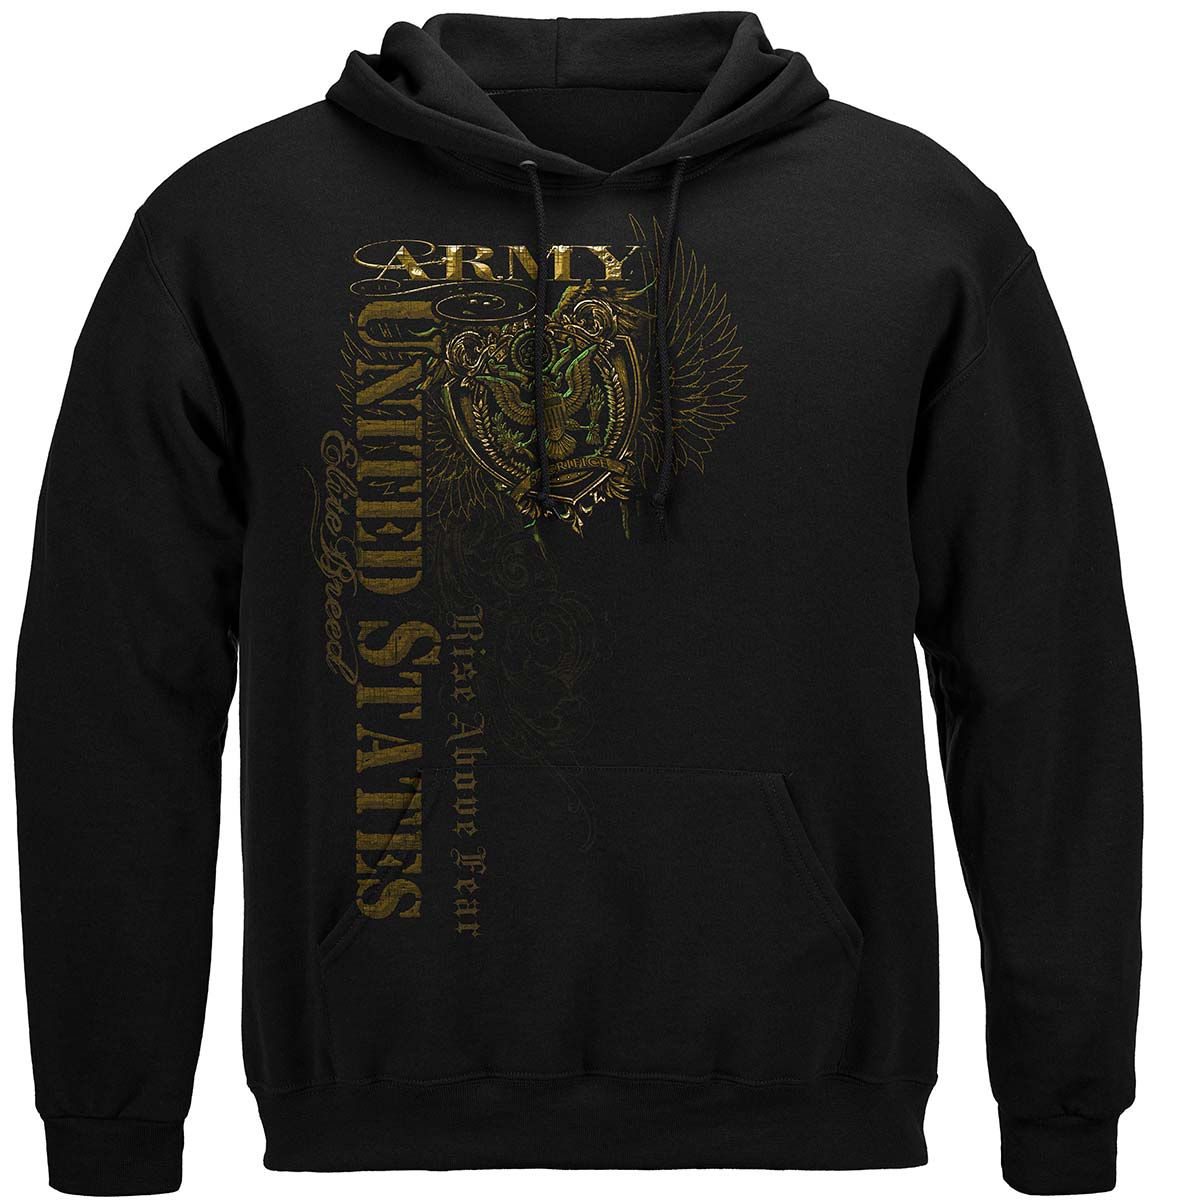 Army Crest Elite Breed Rise Above Fear Premium Hooded Sweat Shirt